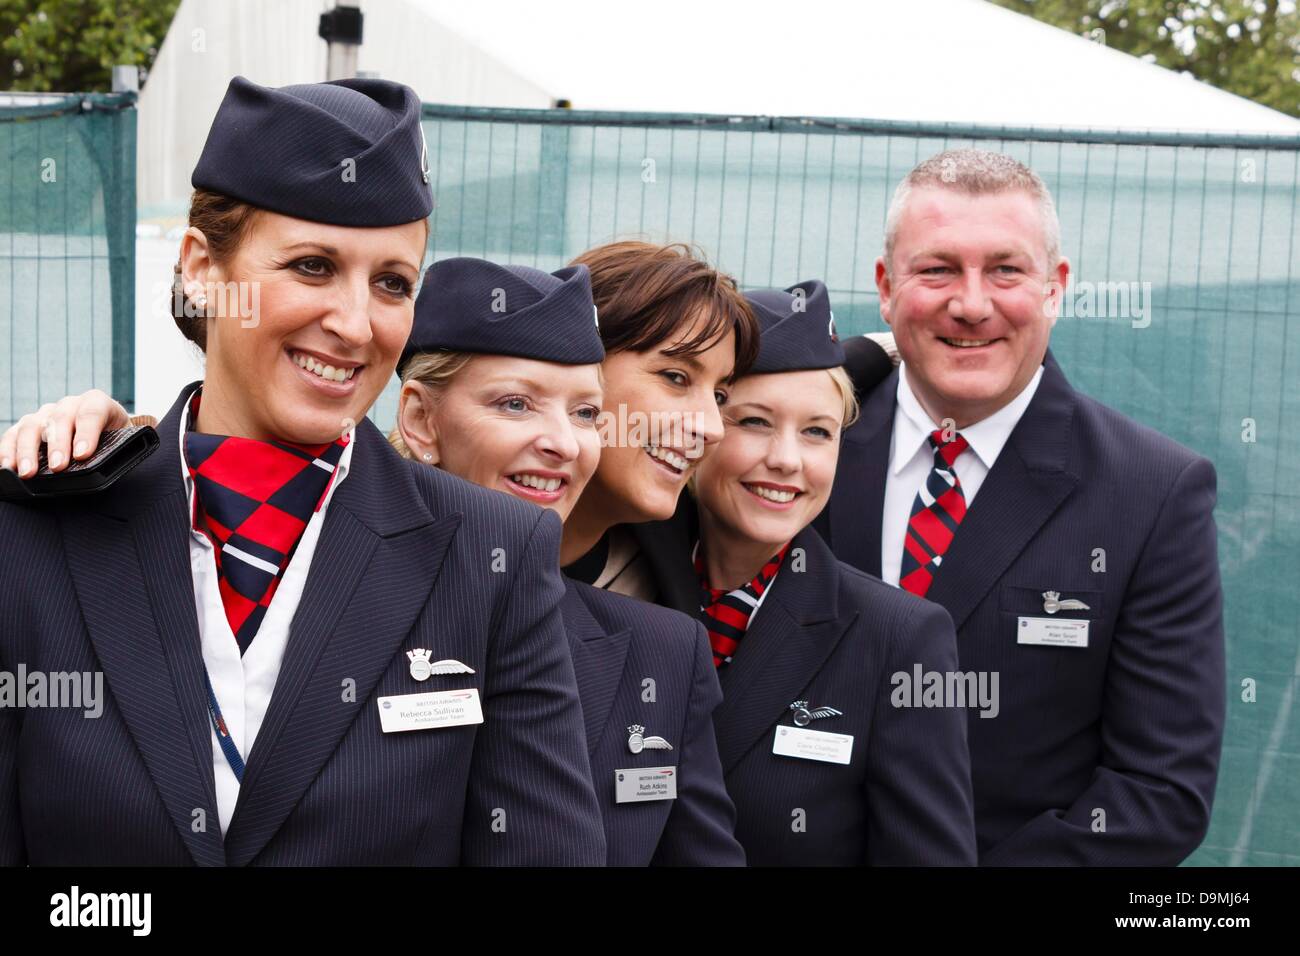 London, UK. 22nd June 2013. British Airways BA staff in uniform attend the  Taste of London 2013. The event is sponsored by British Airways and takes  place every year in Regents Park,